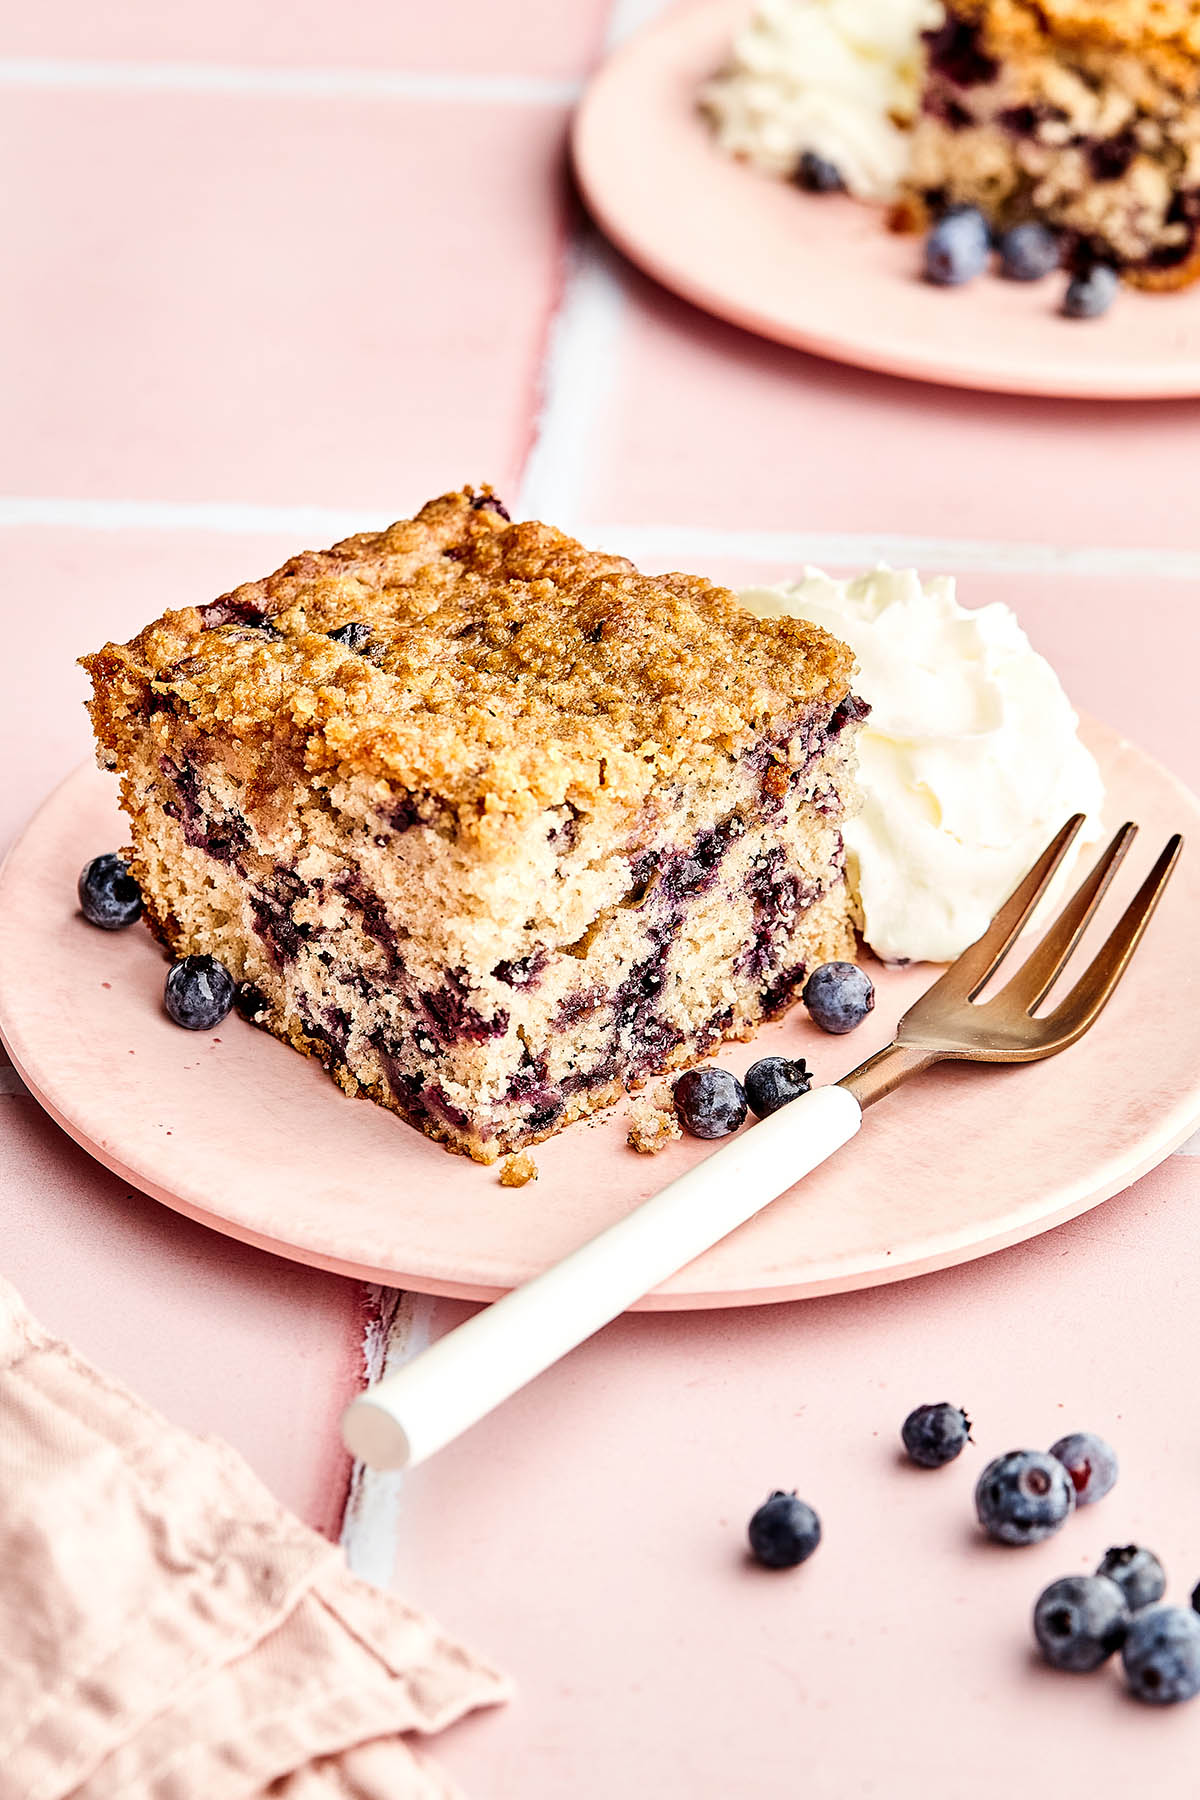 A slice of blueberry coffee cake on a pink plate with a dollop of whipped cream, a fork, and fresh blueberries scattered around.